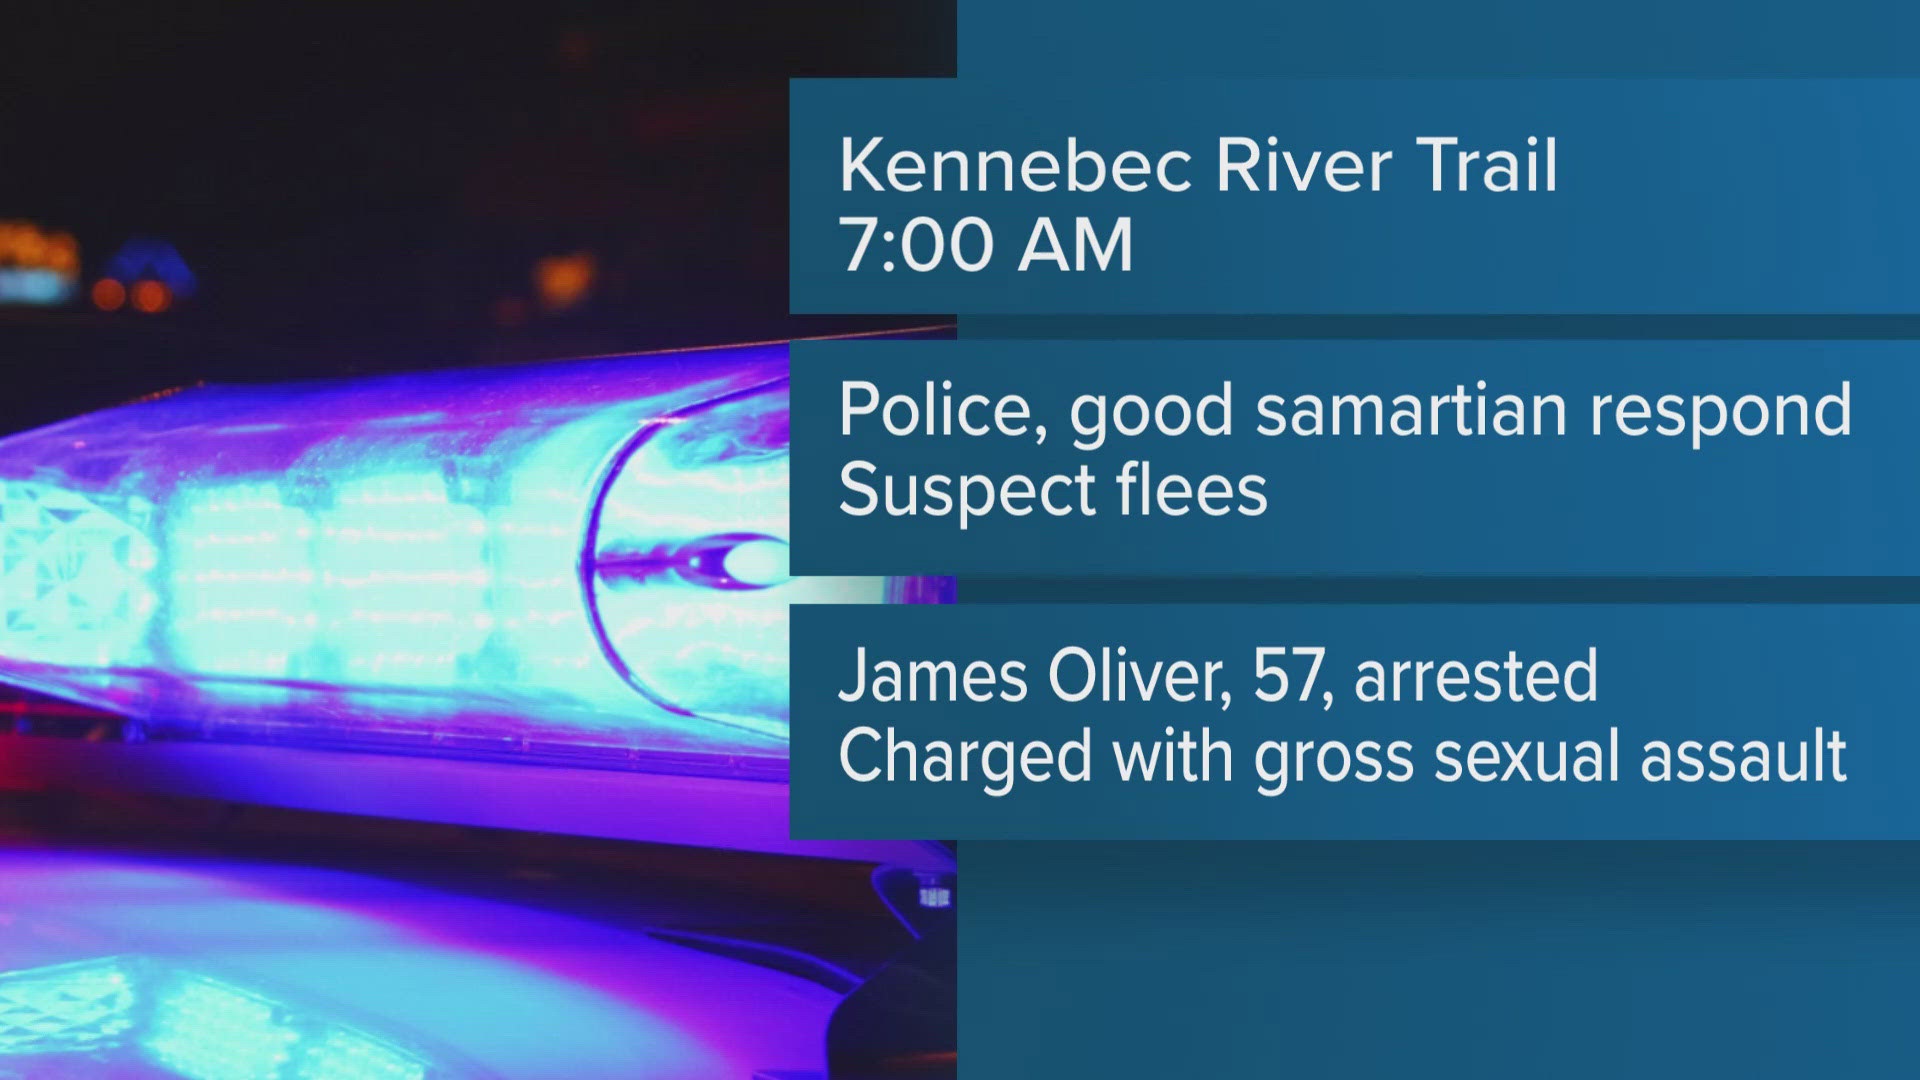 Police say the incident happened Monday morning on the Kennebec River Rail Trail.